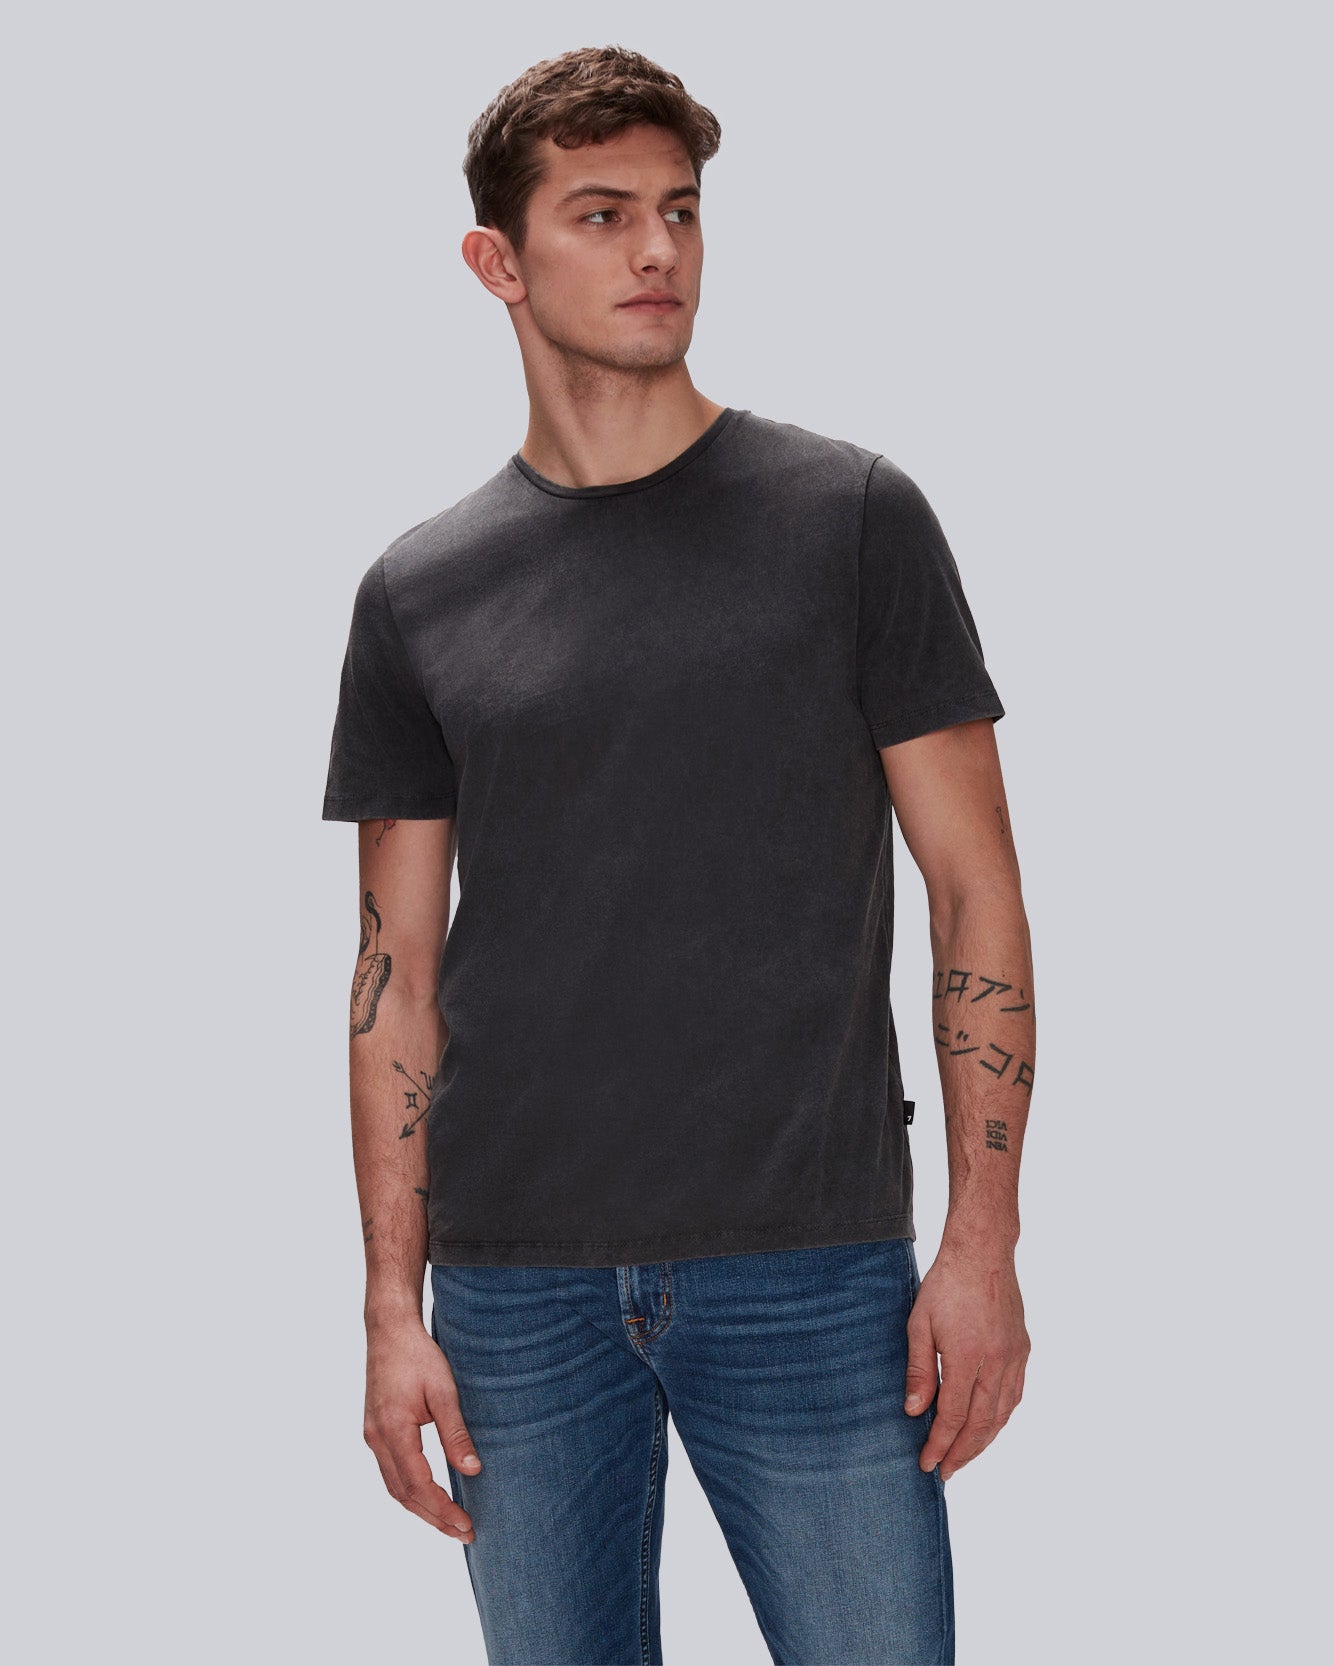 7 For All Mankind Sunfaded Tee in Black 7M207344BLK